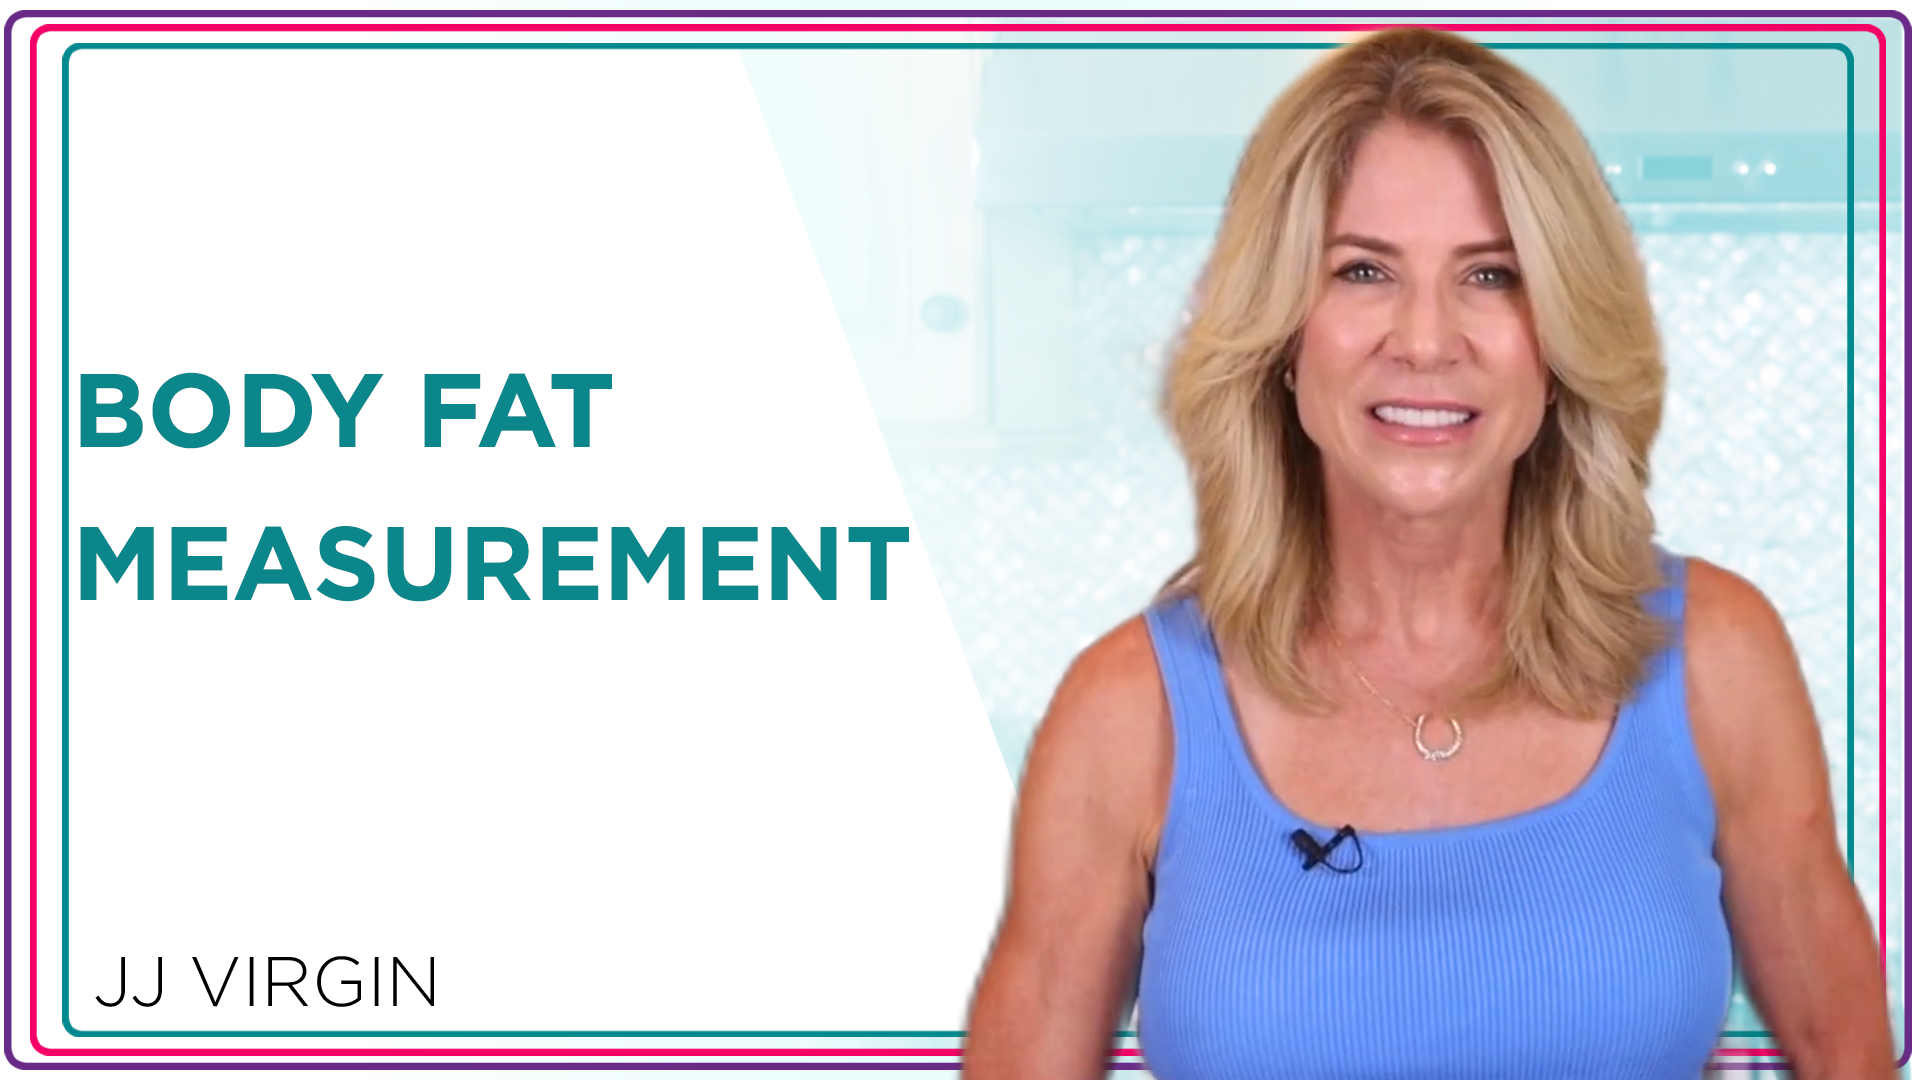 Why Your Body Fat Scale Readings Will NOT Add Up To 100% – Eat Smart